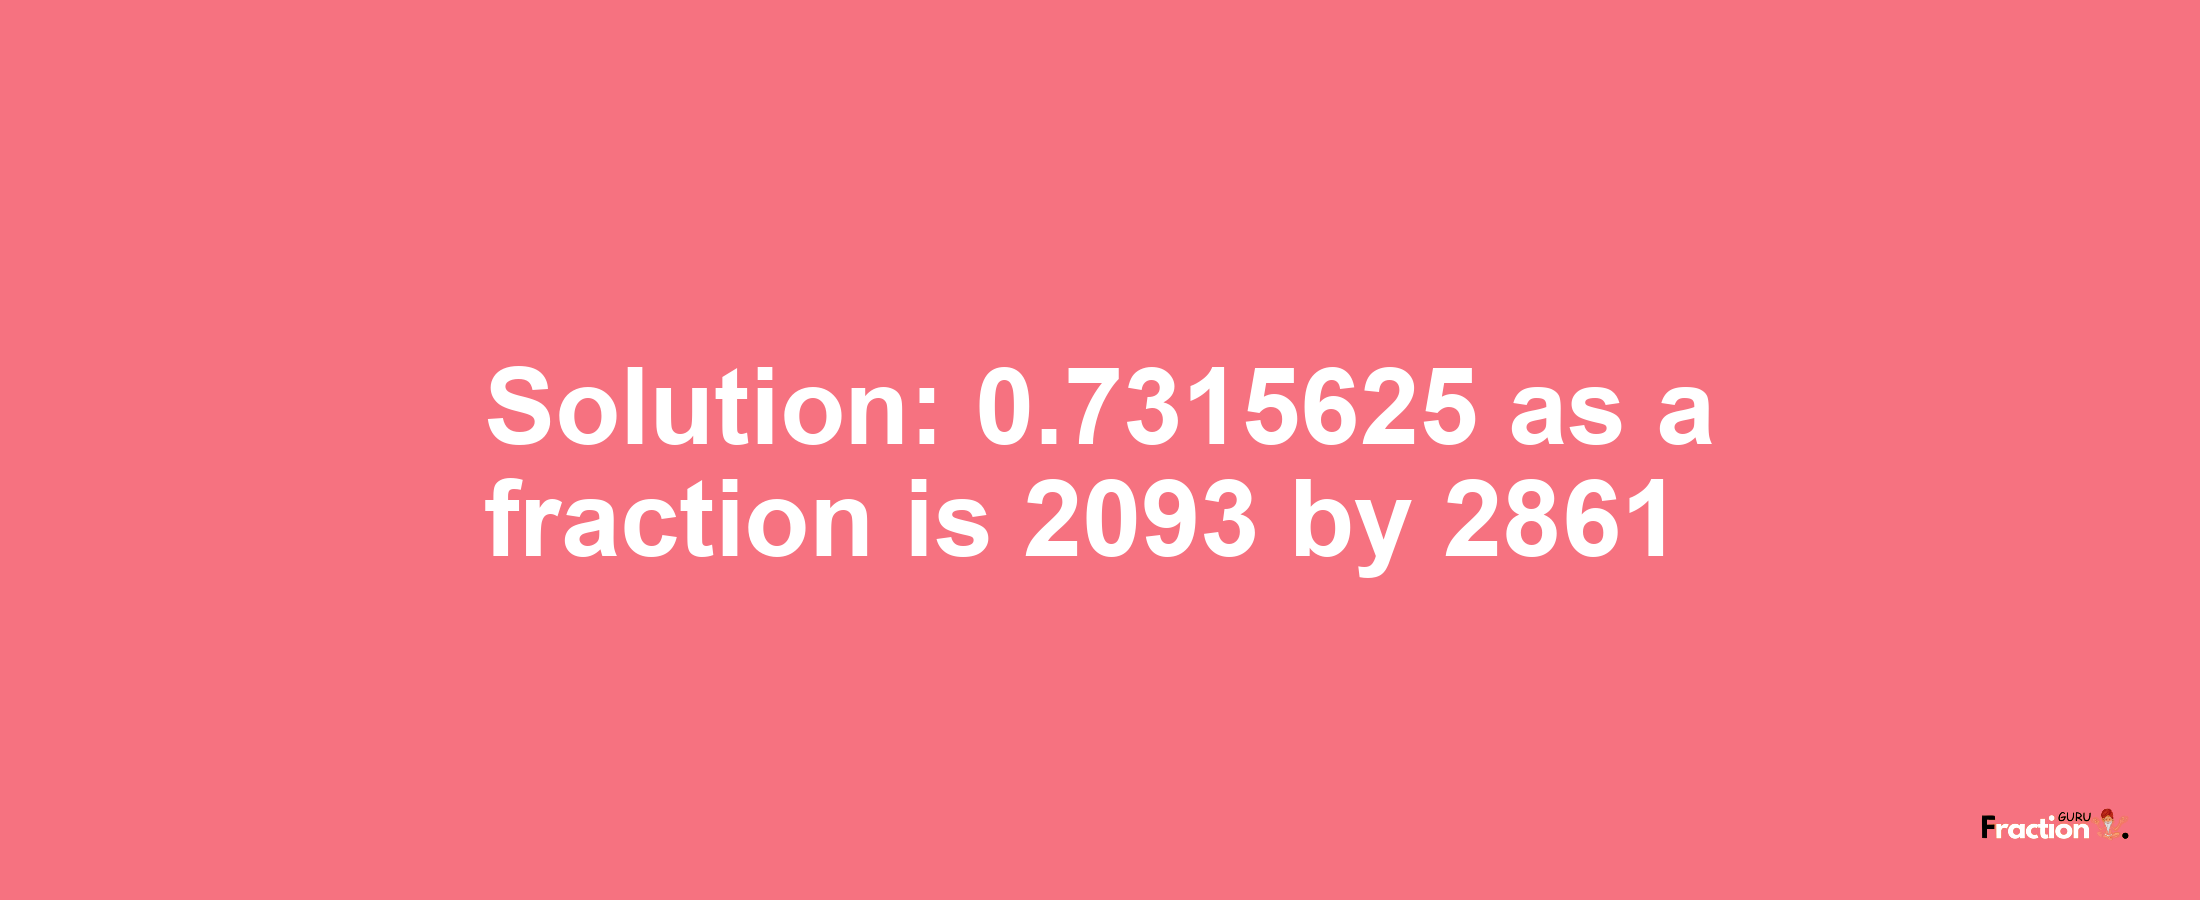 Solution:0.7315625 as a fraction is 2093/2861